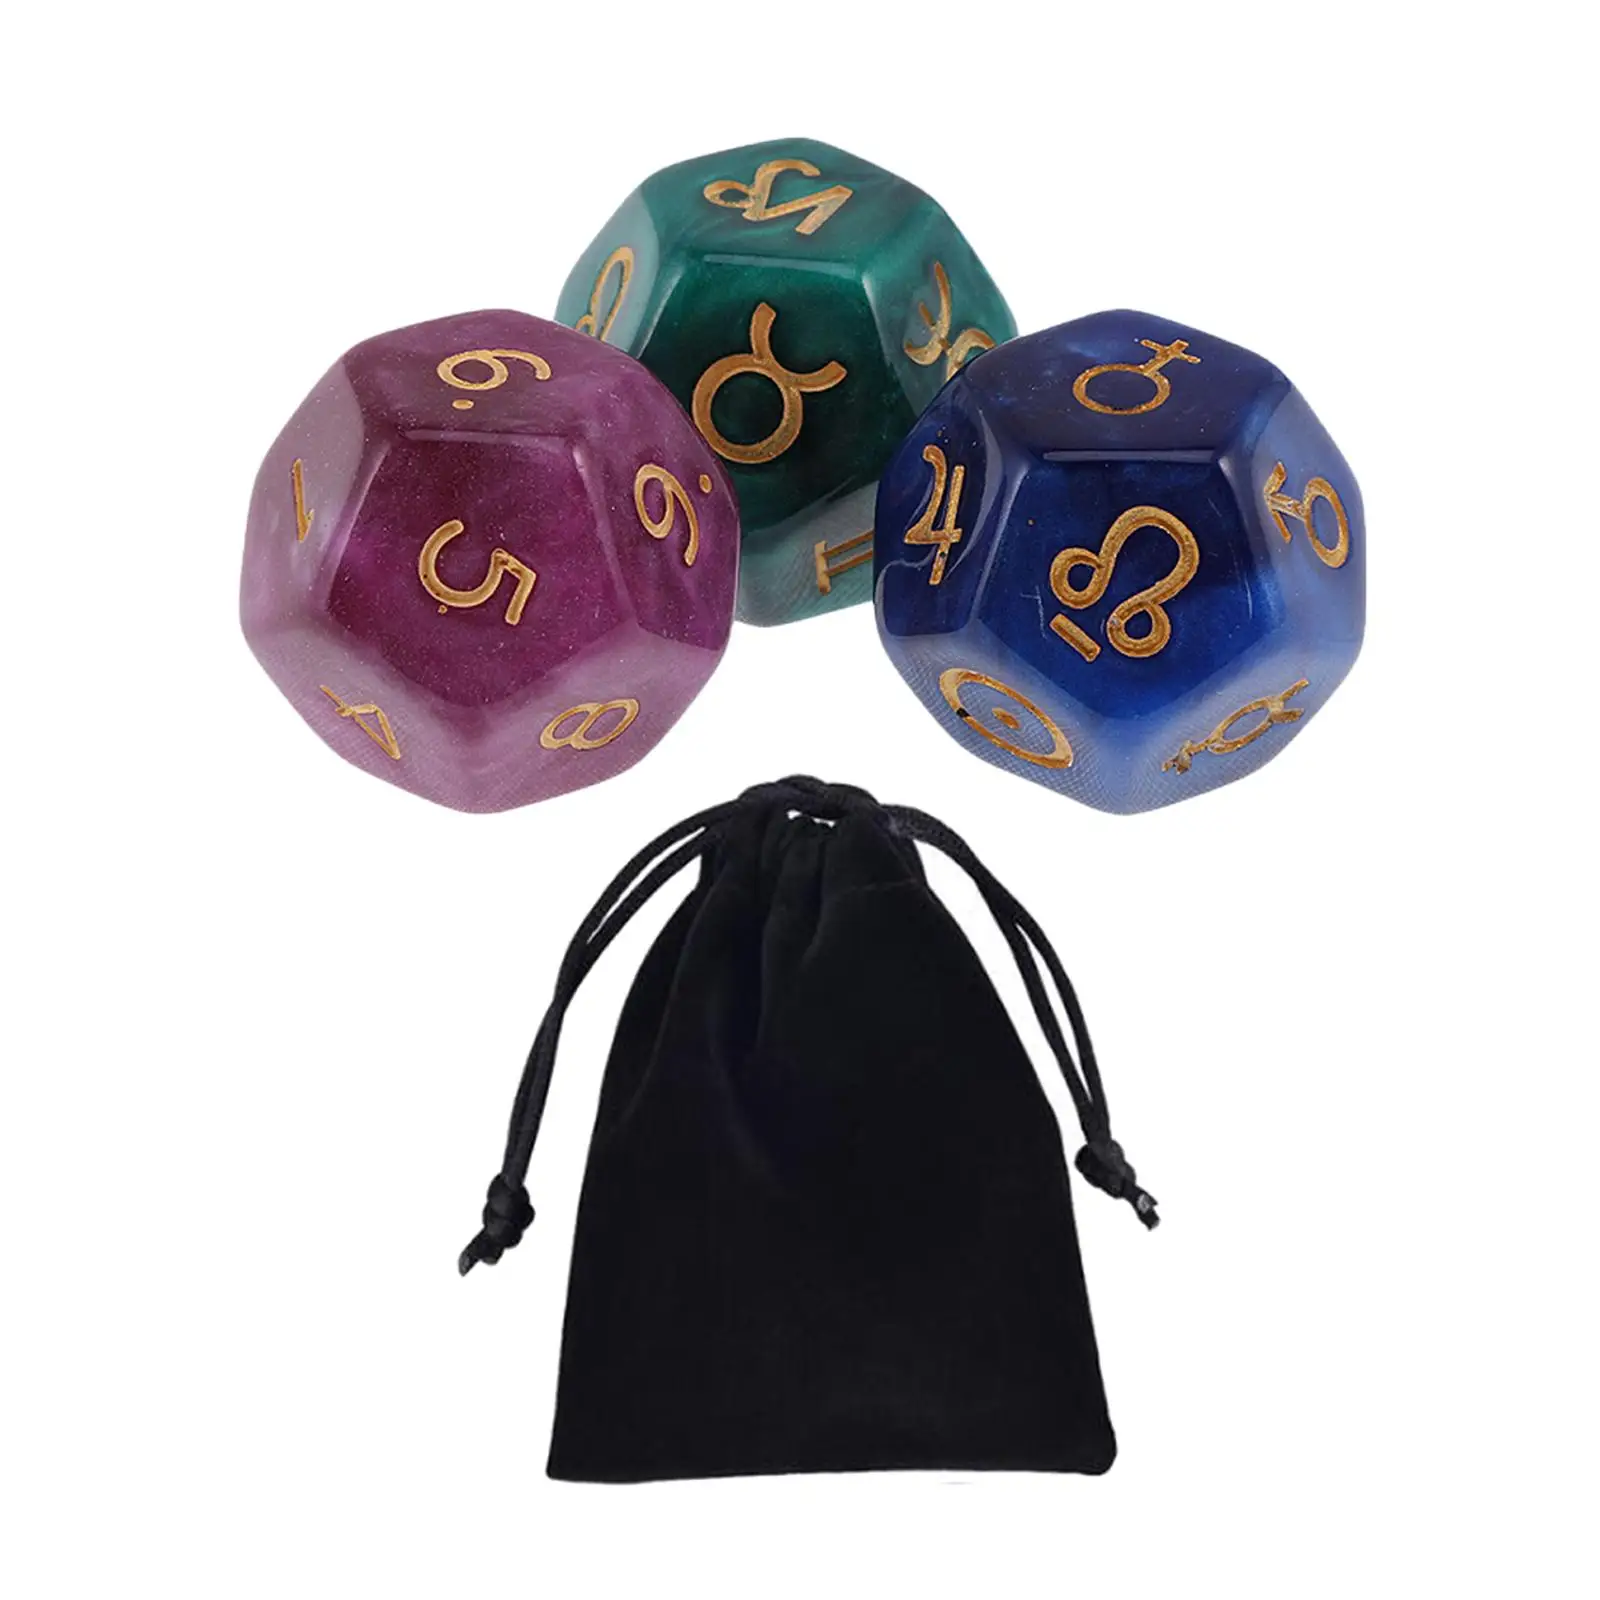 3 Pieces Acrylic Astrological Dice Constellation Dice Collectibles Polyhedral Dices with Pouch for Cards Party Accessory